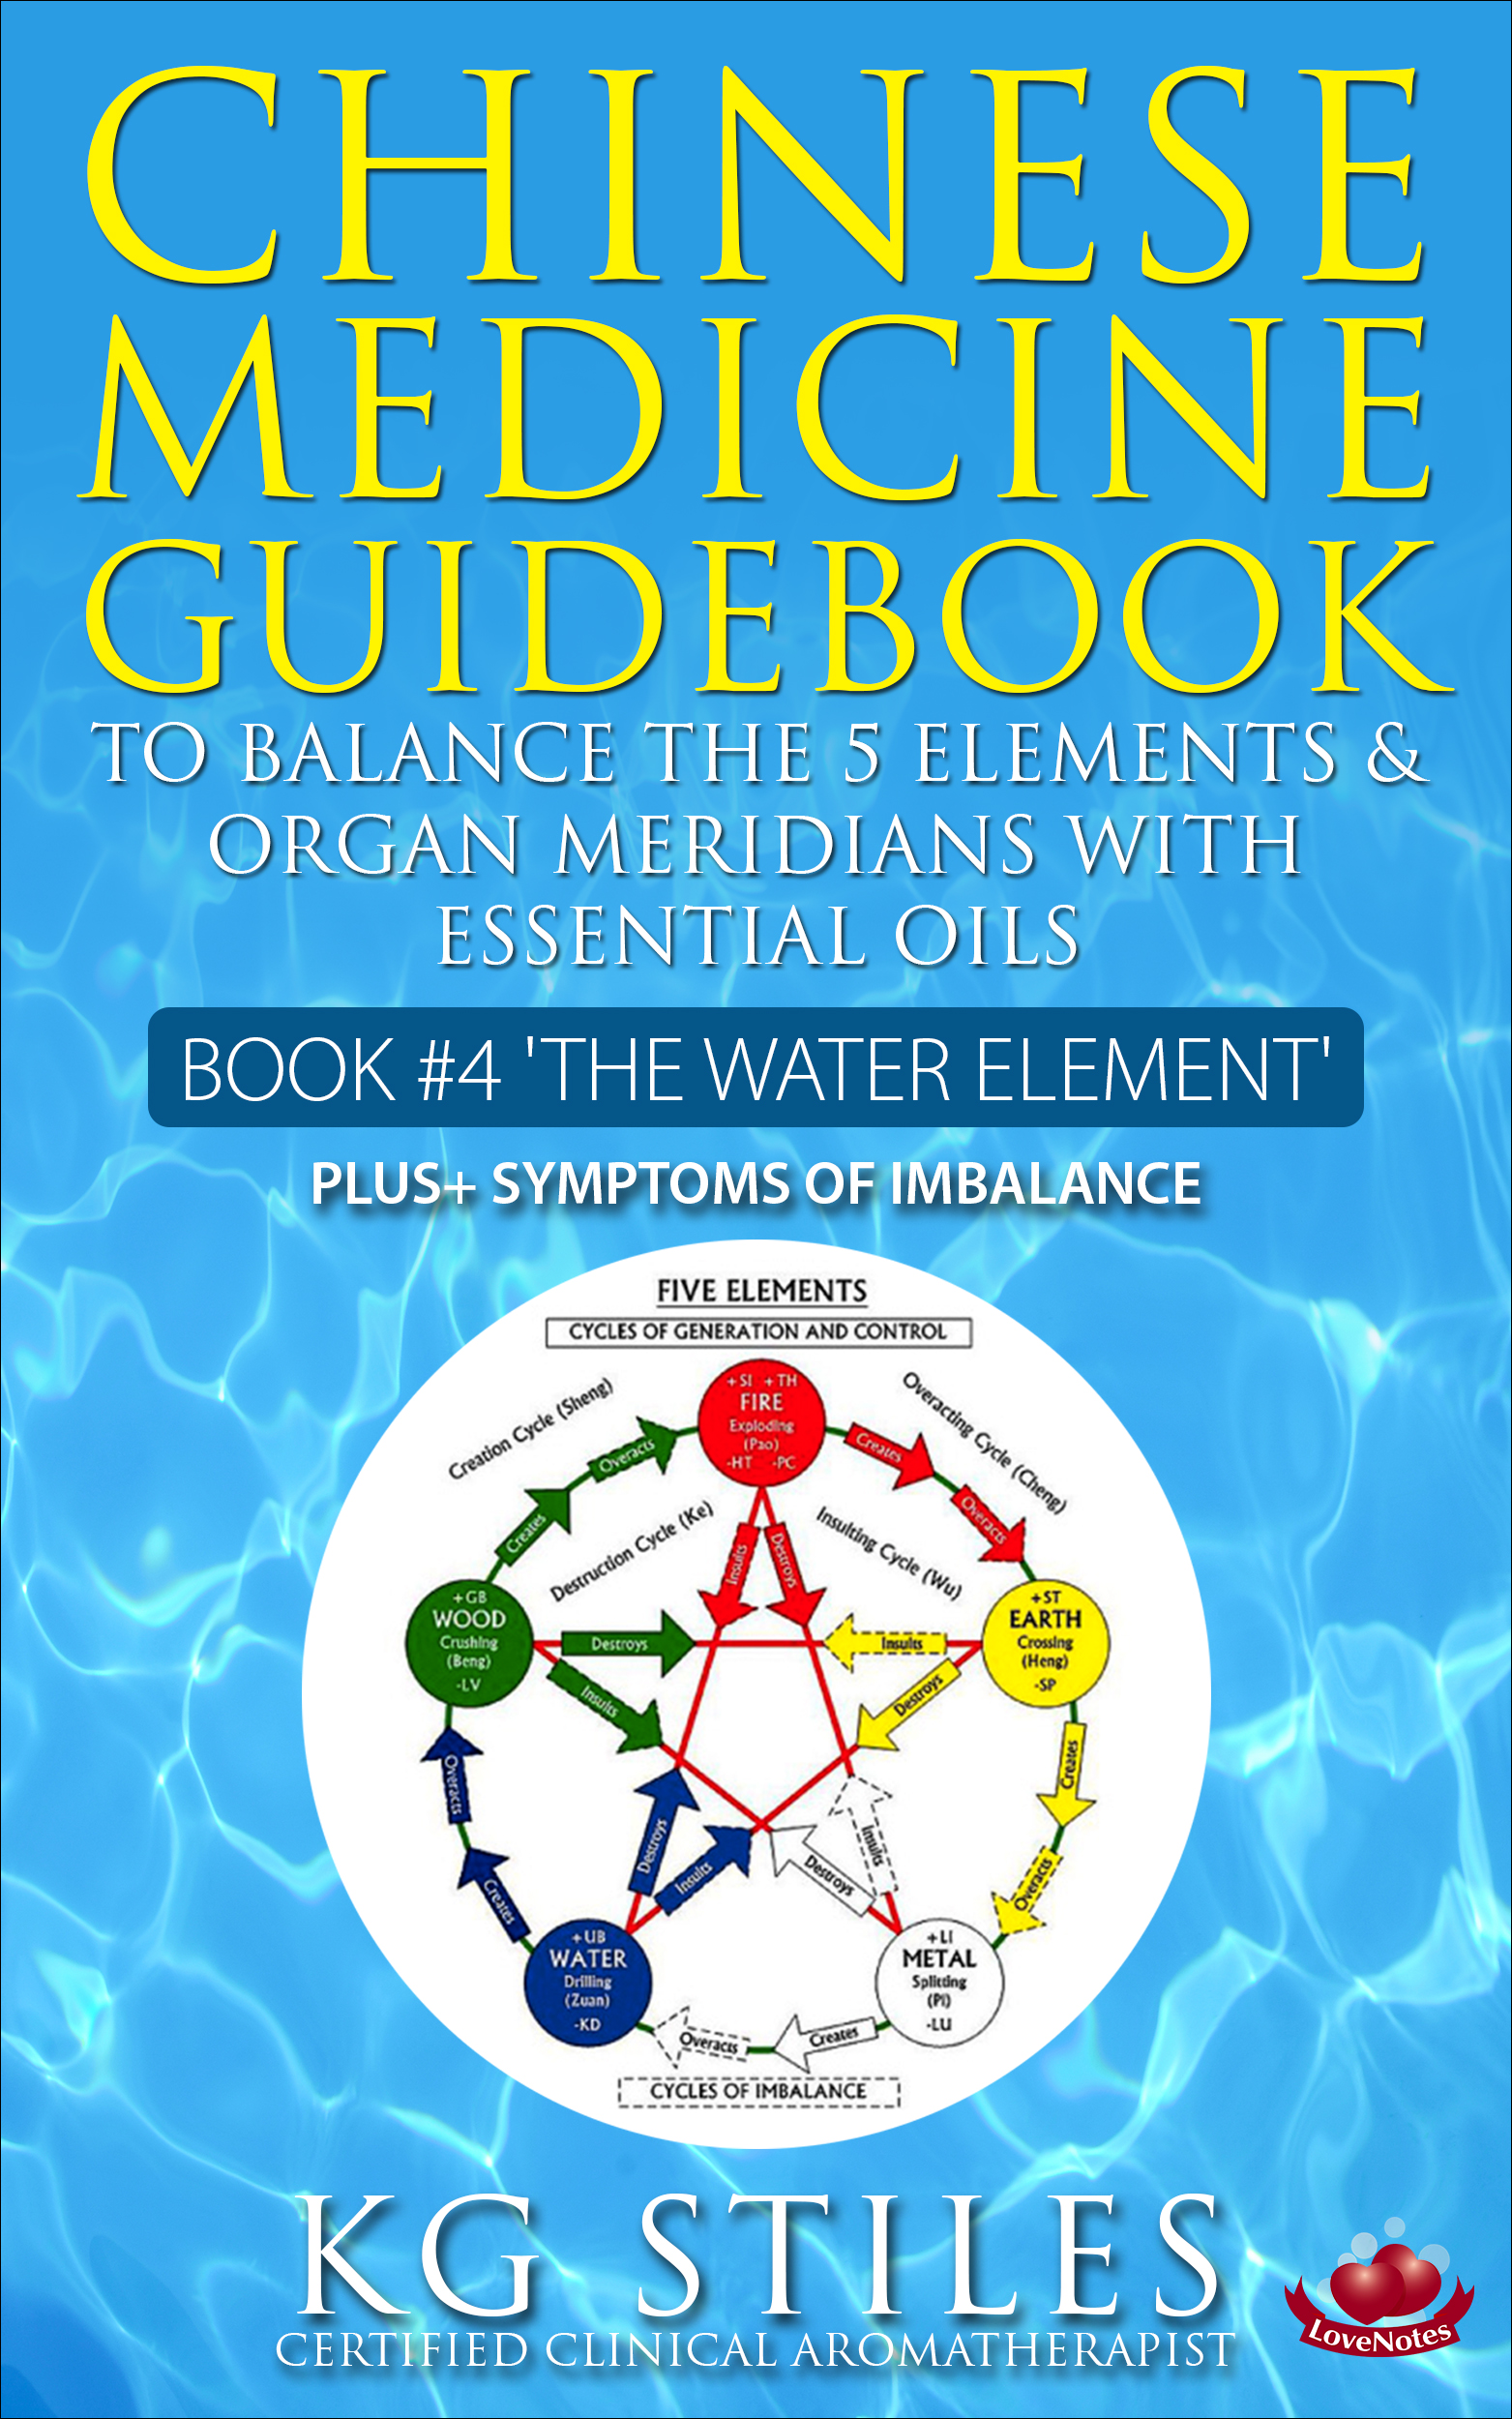 Essential Oils to Balance the Water Element & Organ Meridians